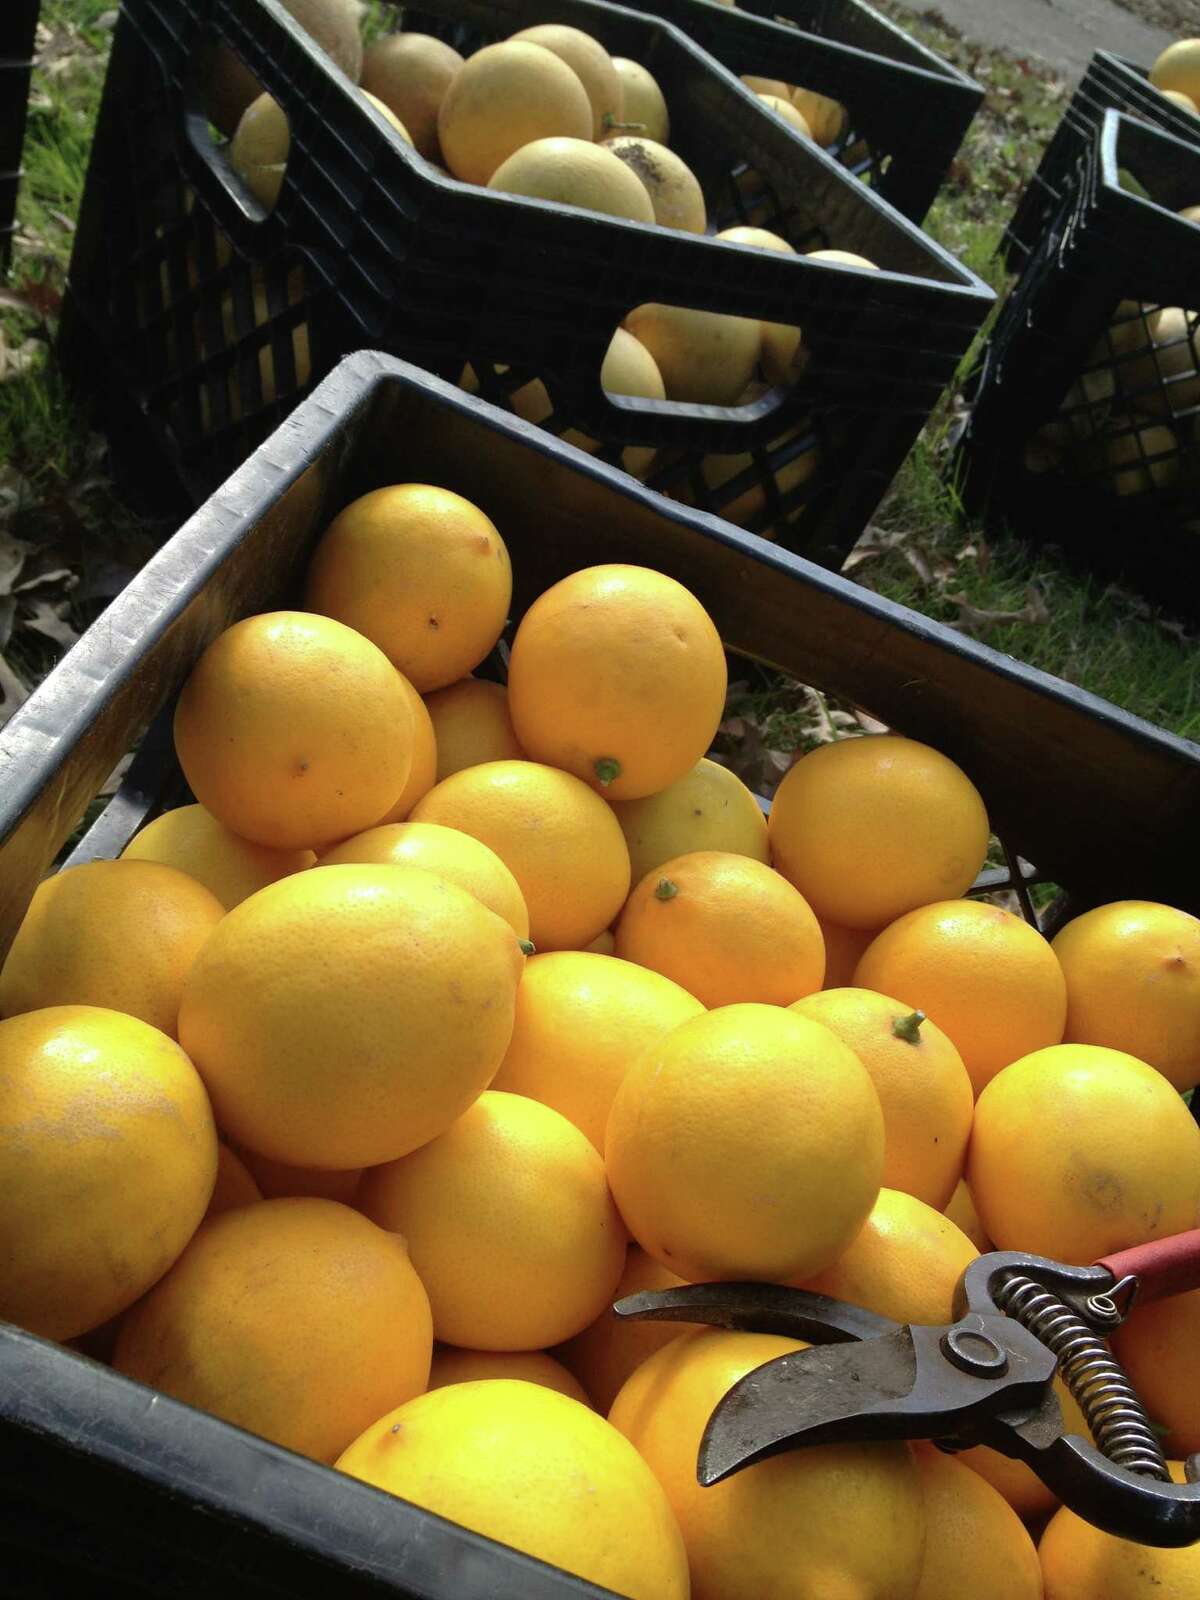 FruitShare provides its produce to Casa Juan Diego for distribution.